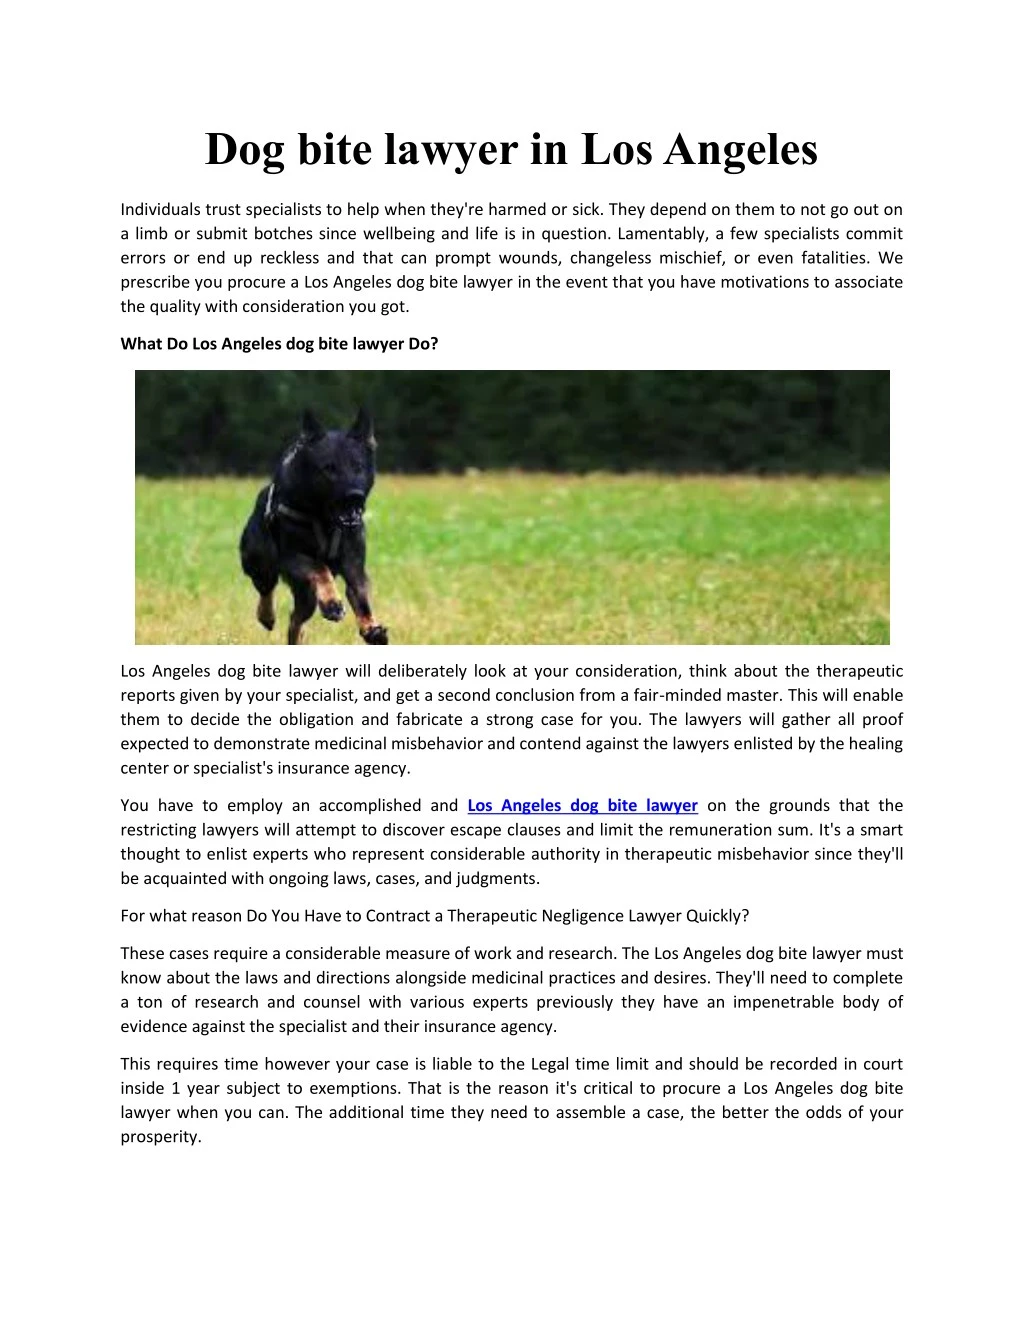 dog bite lawyer in los angeles